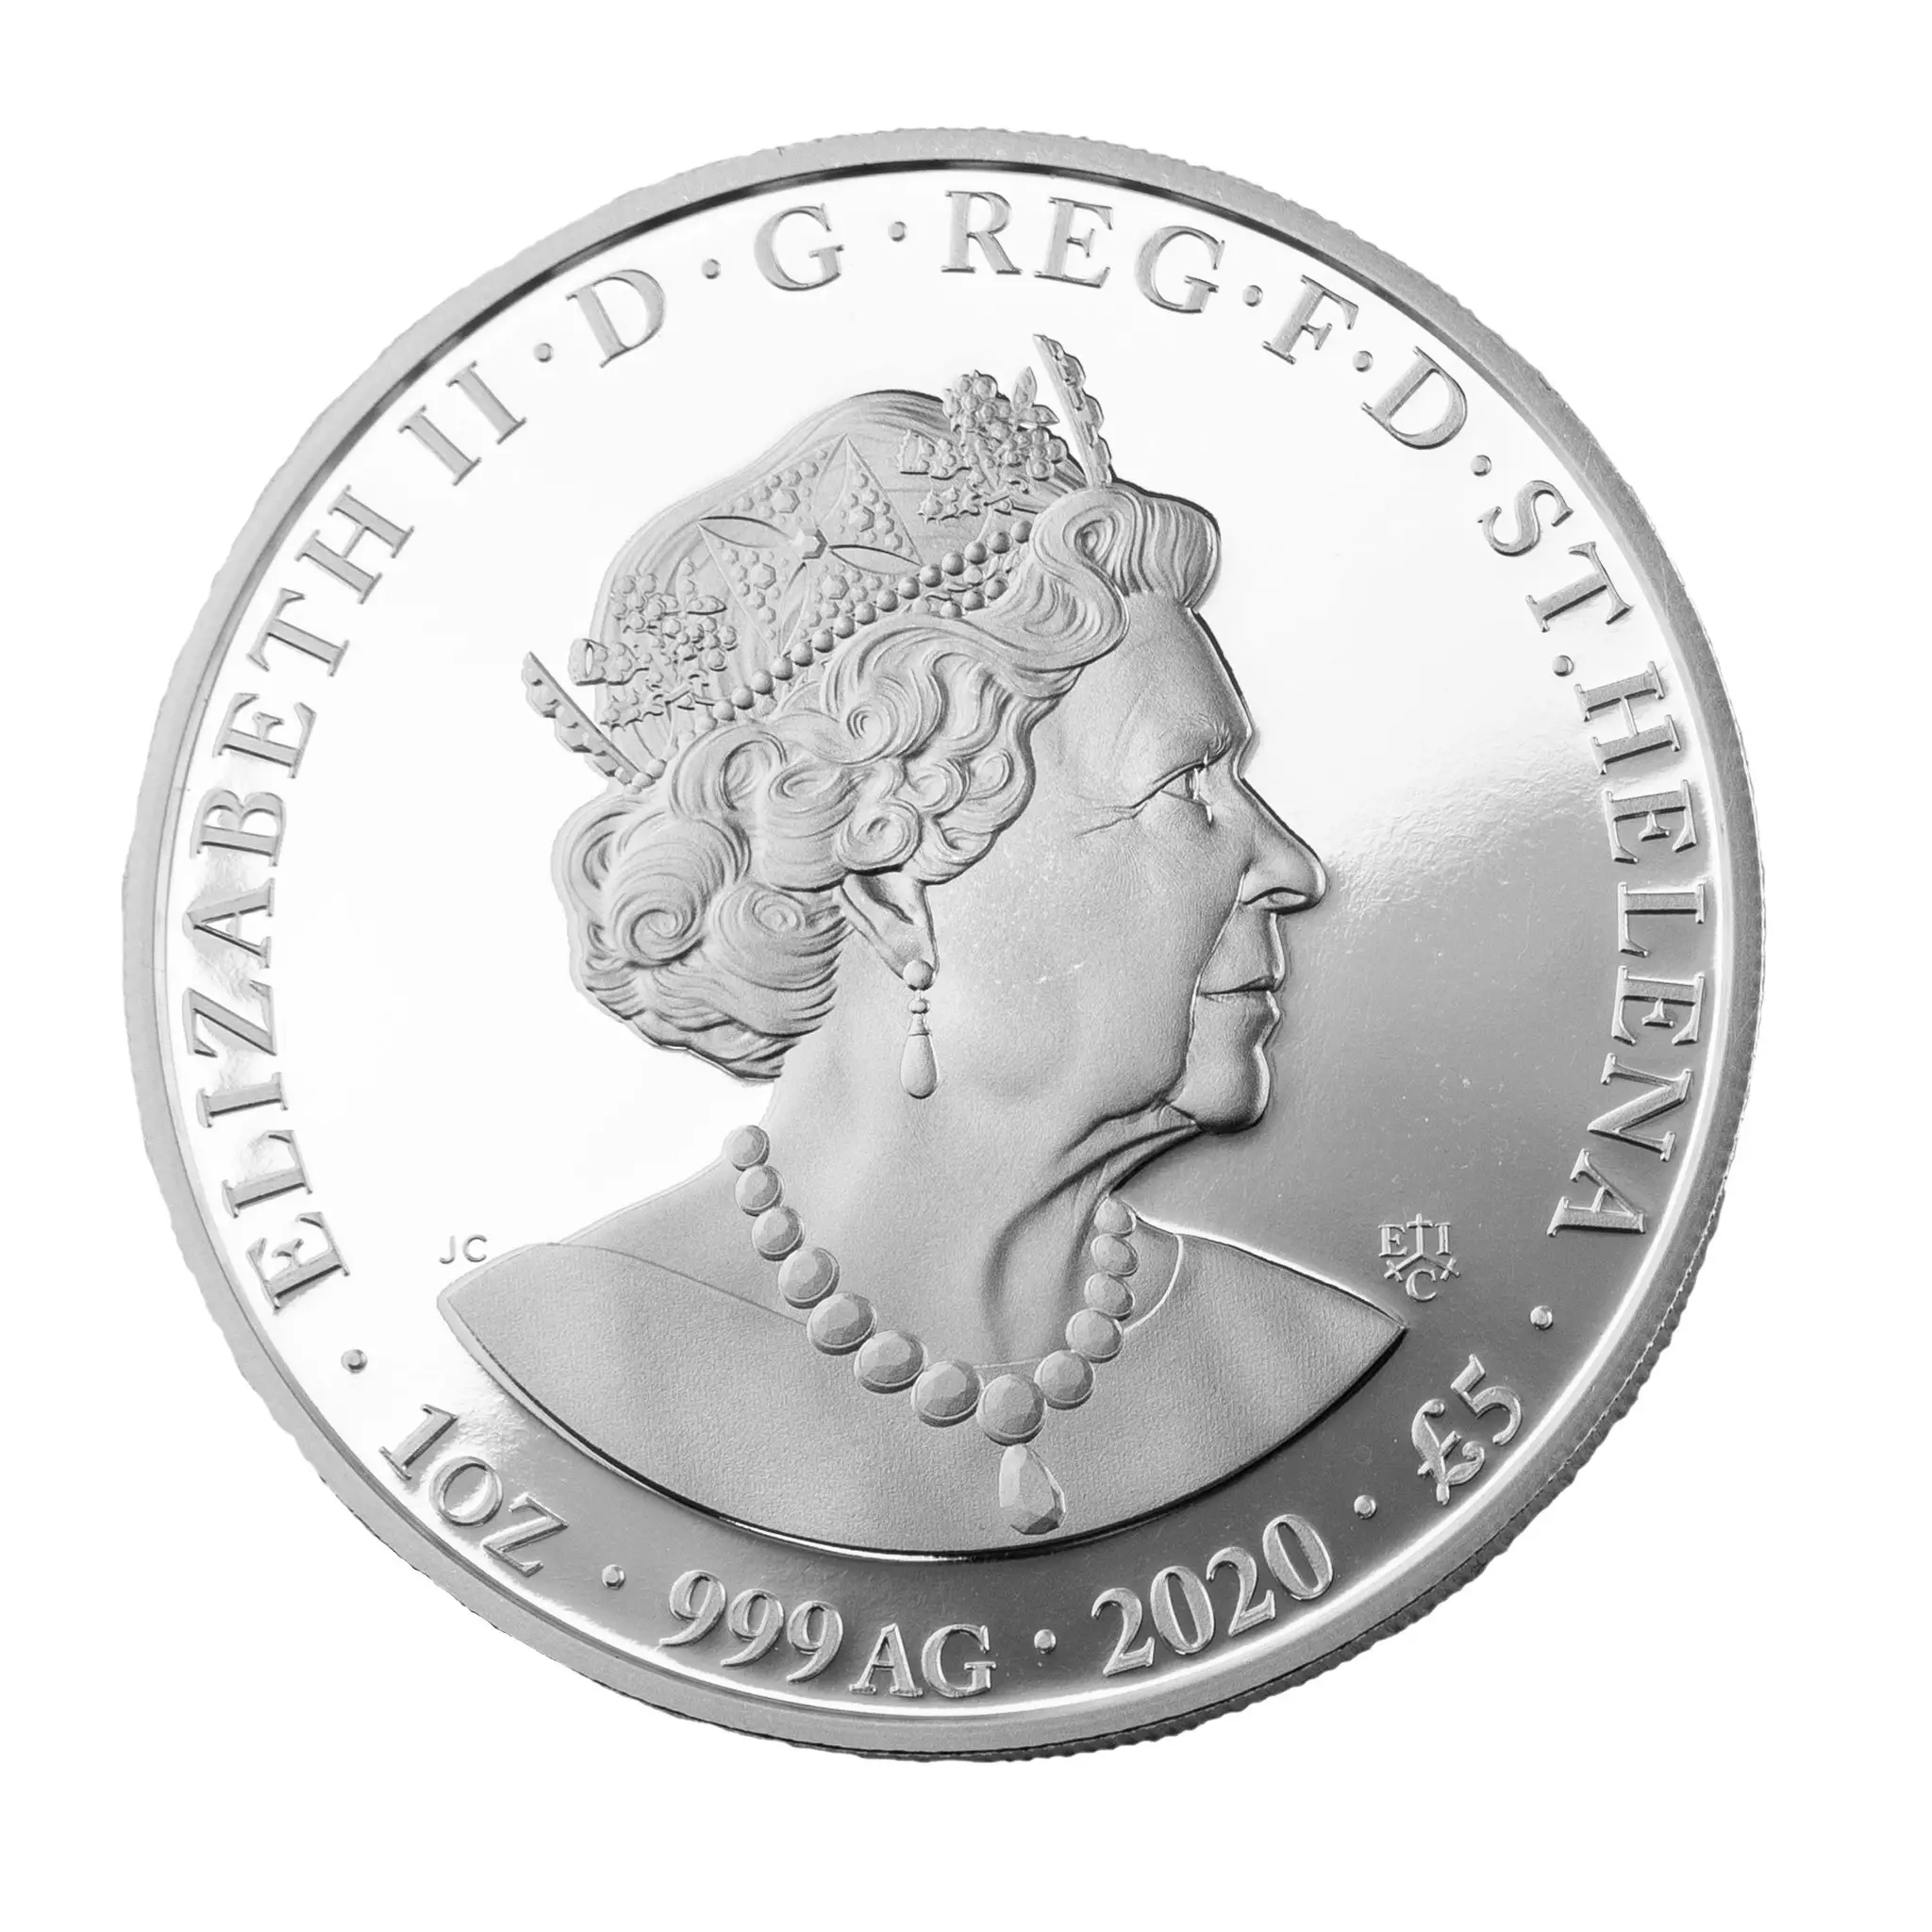 The coin is dedicated to NHS Heroes and all profits go to charity (